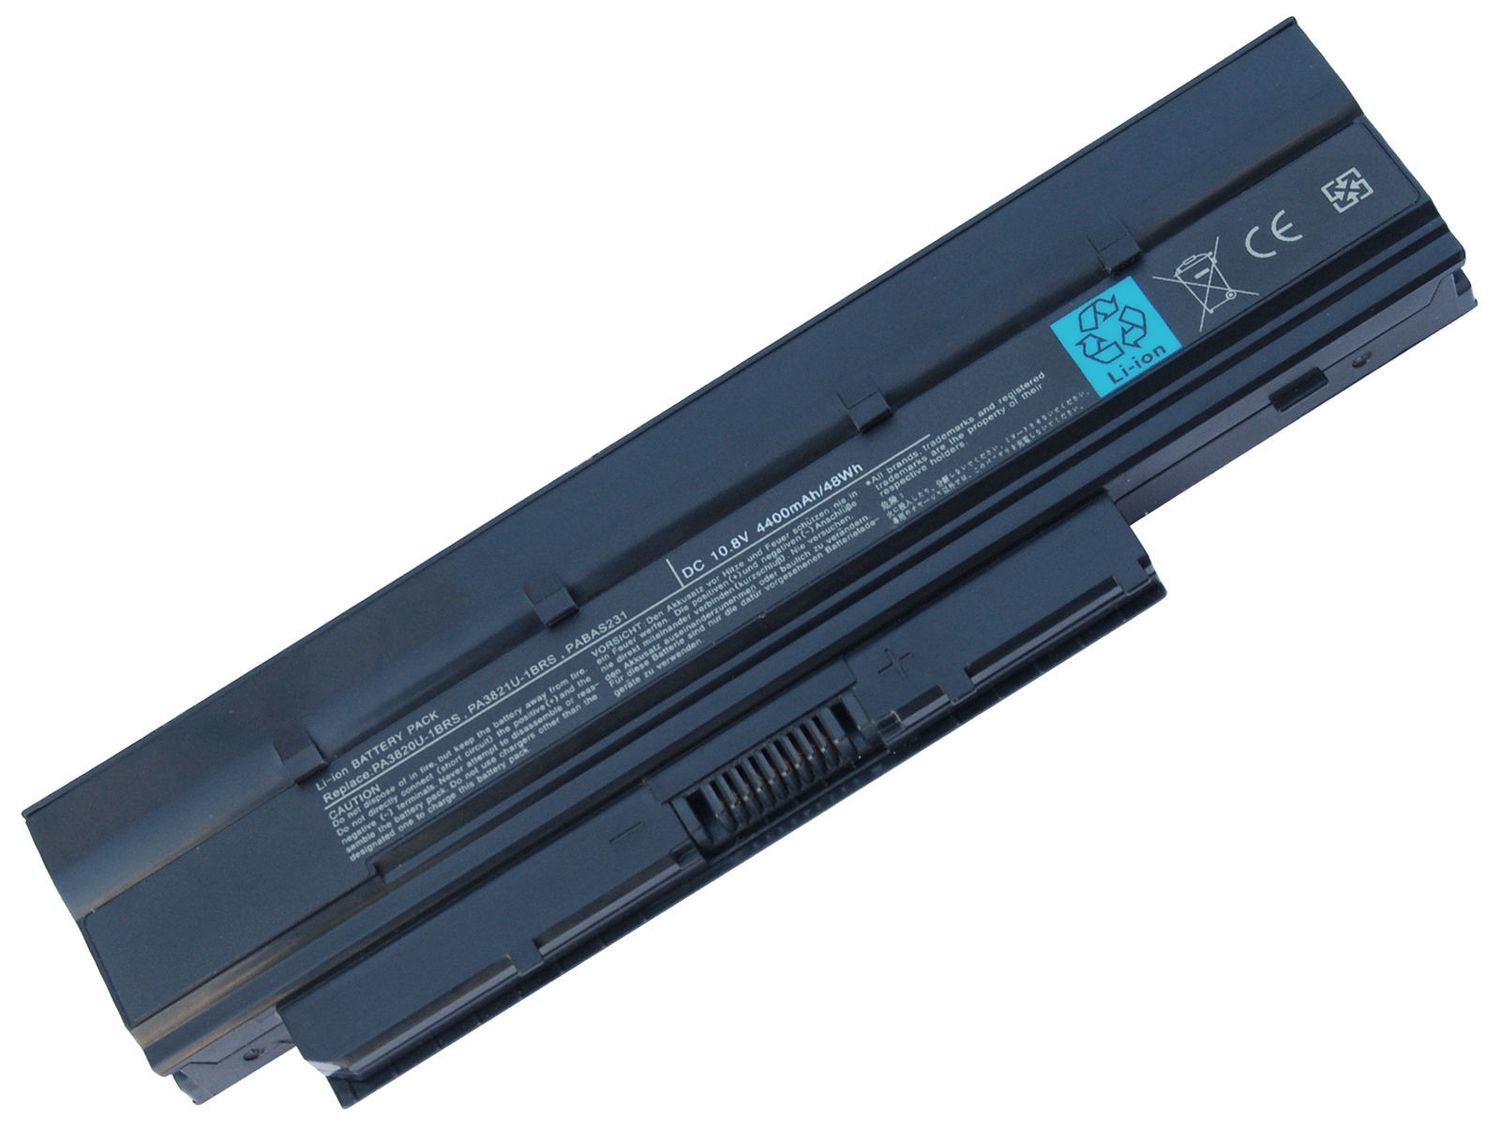 compatible for Toshiba dynabook MX/34MBL Dynabook N300 Dynabook N510 laptop battery